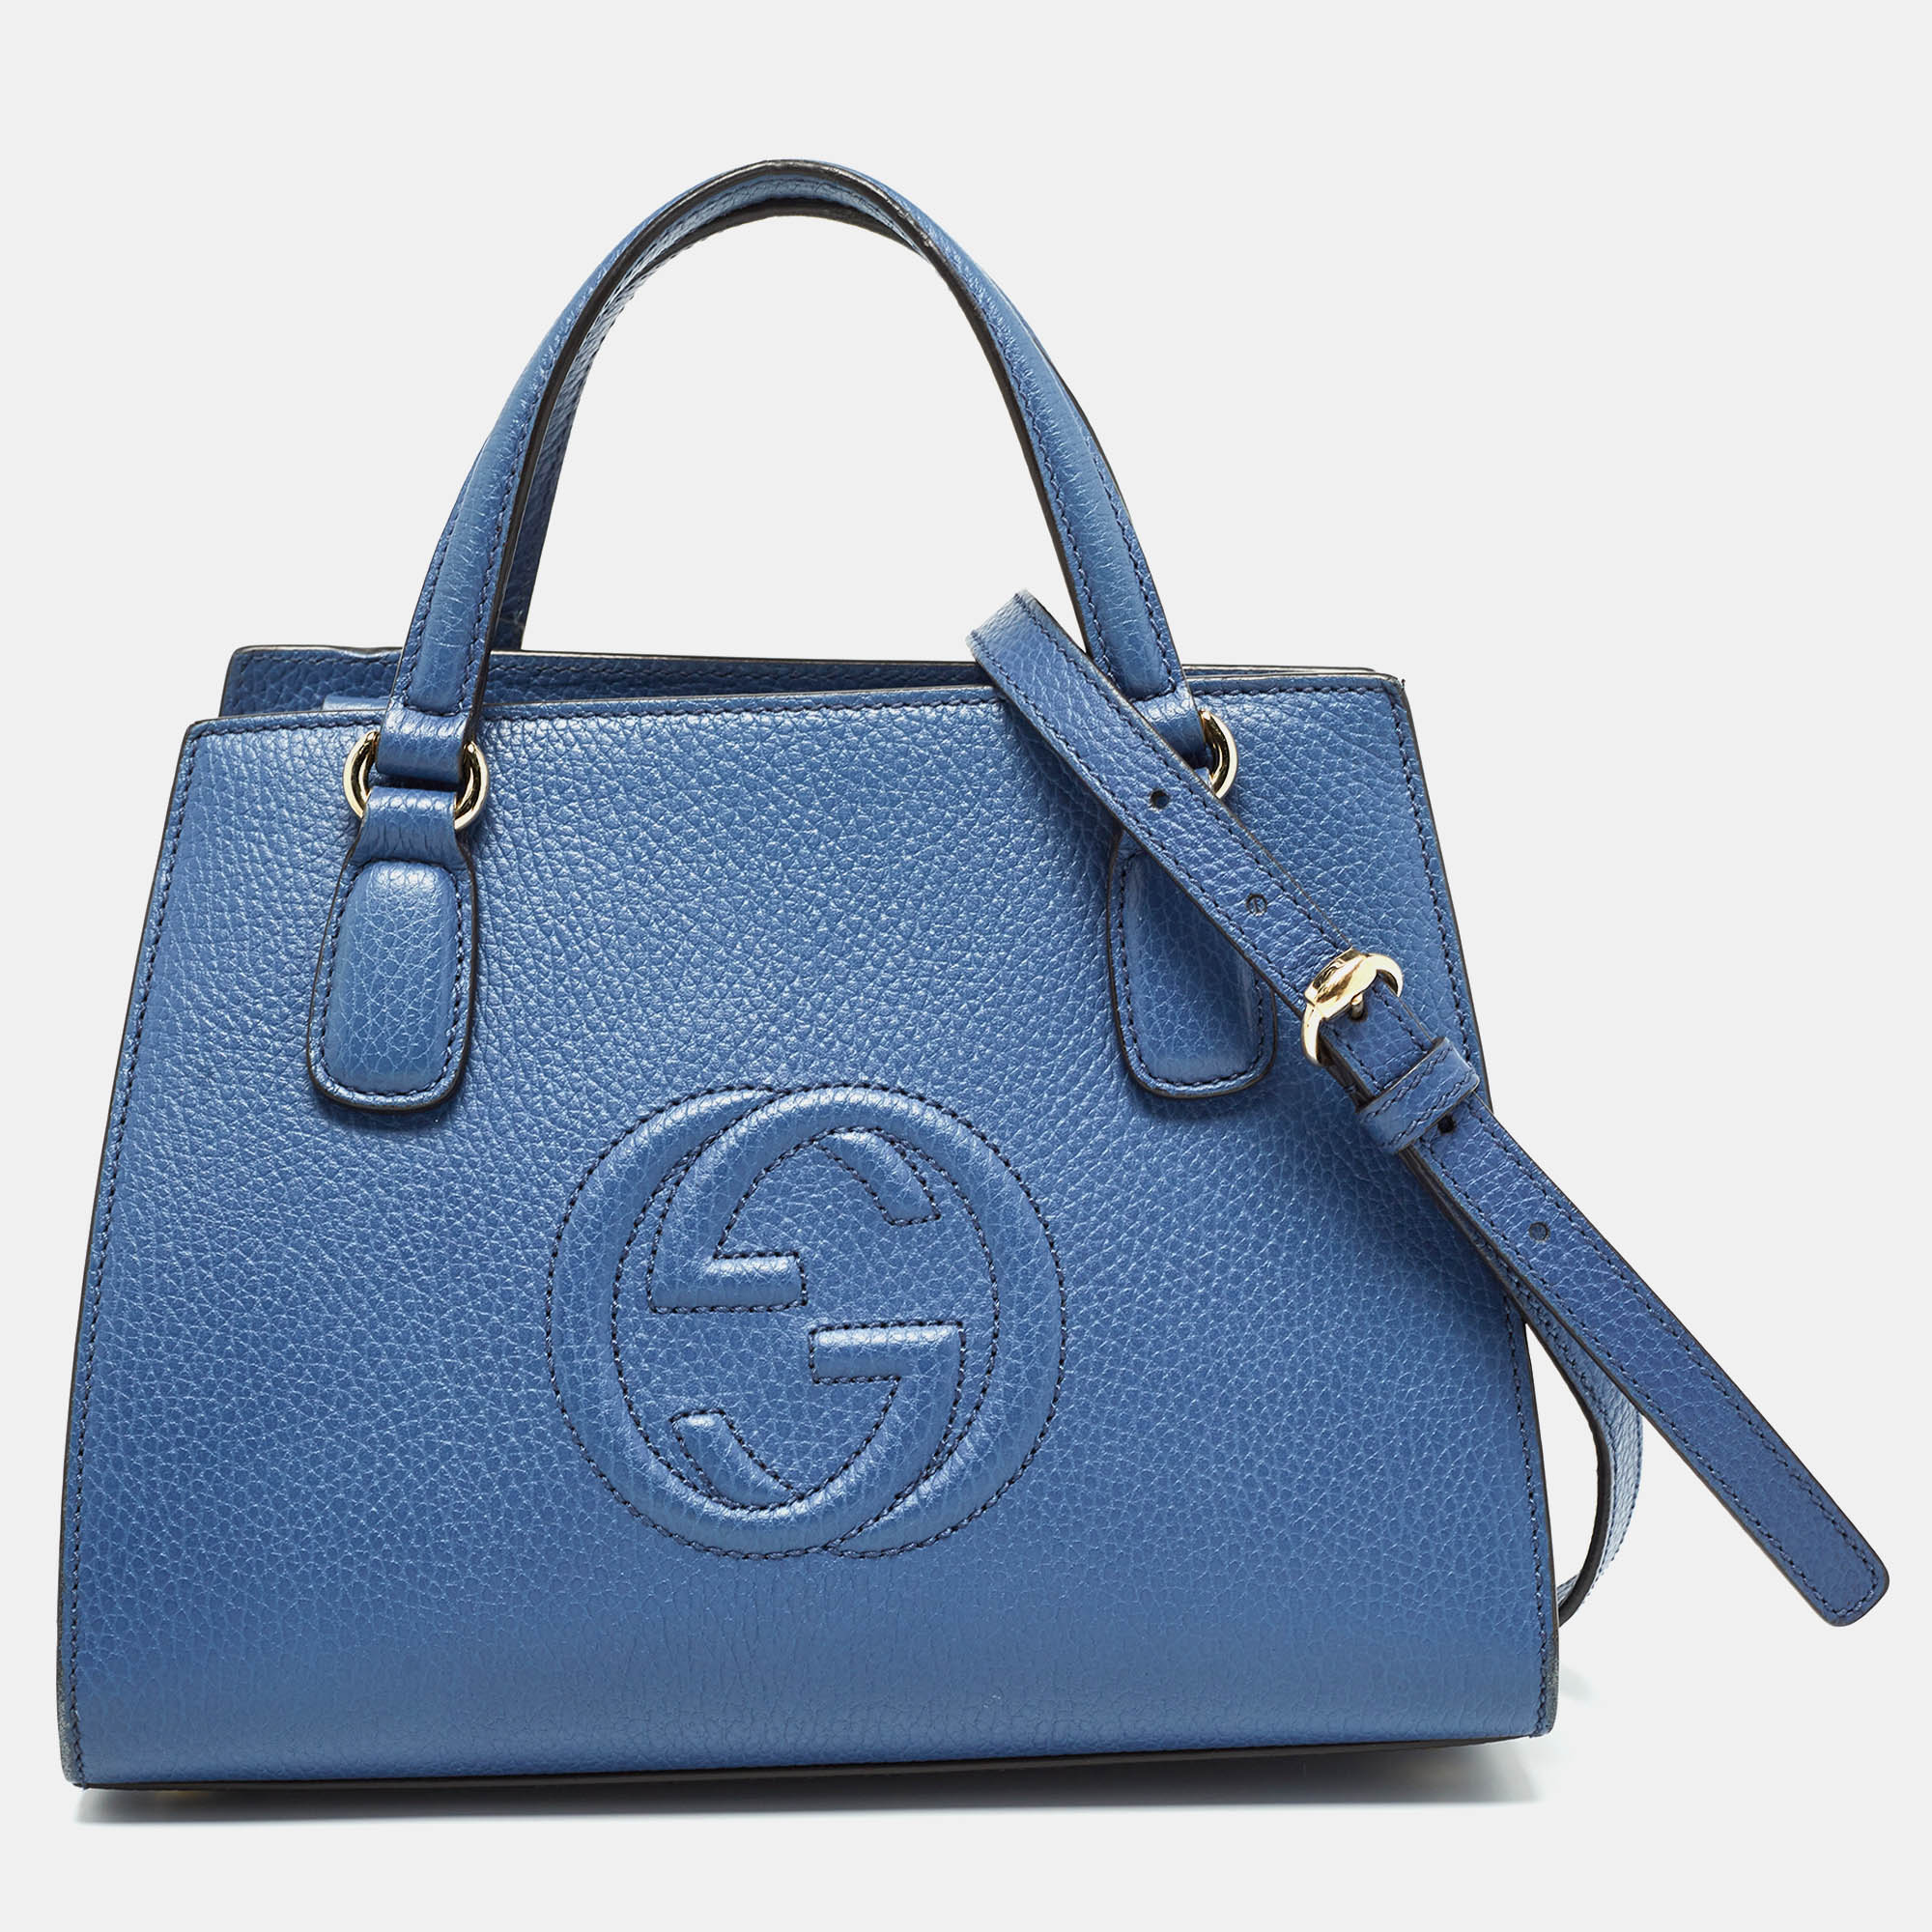 Pre-owned Gucci Blue Leather Soho Top Handle Bag